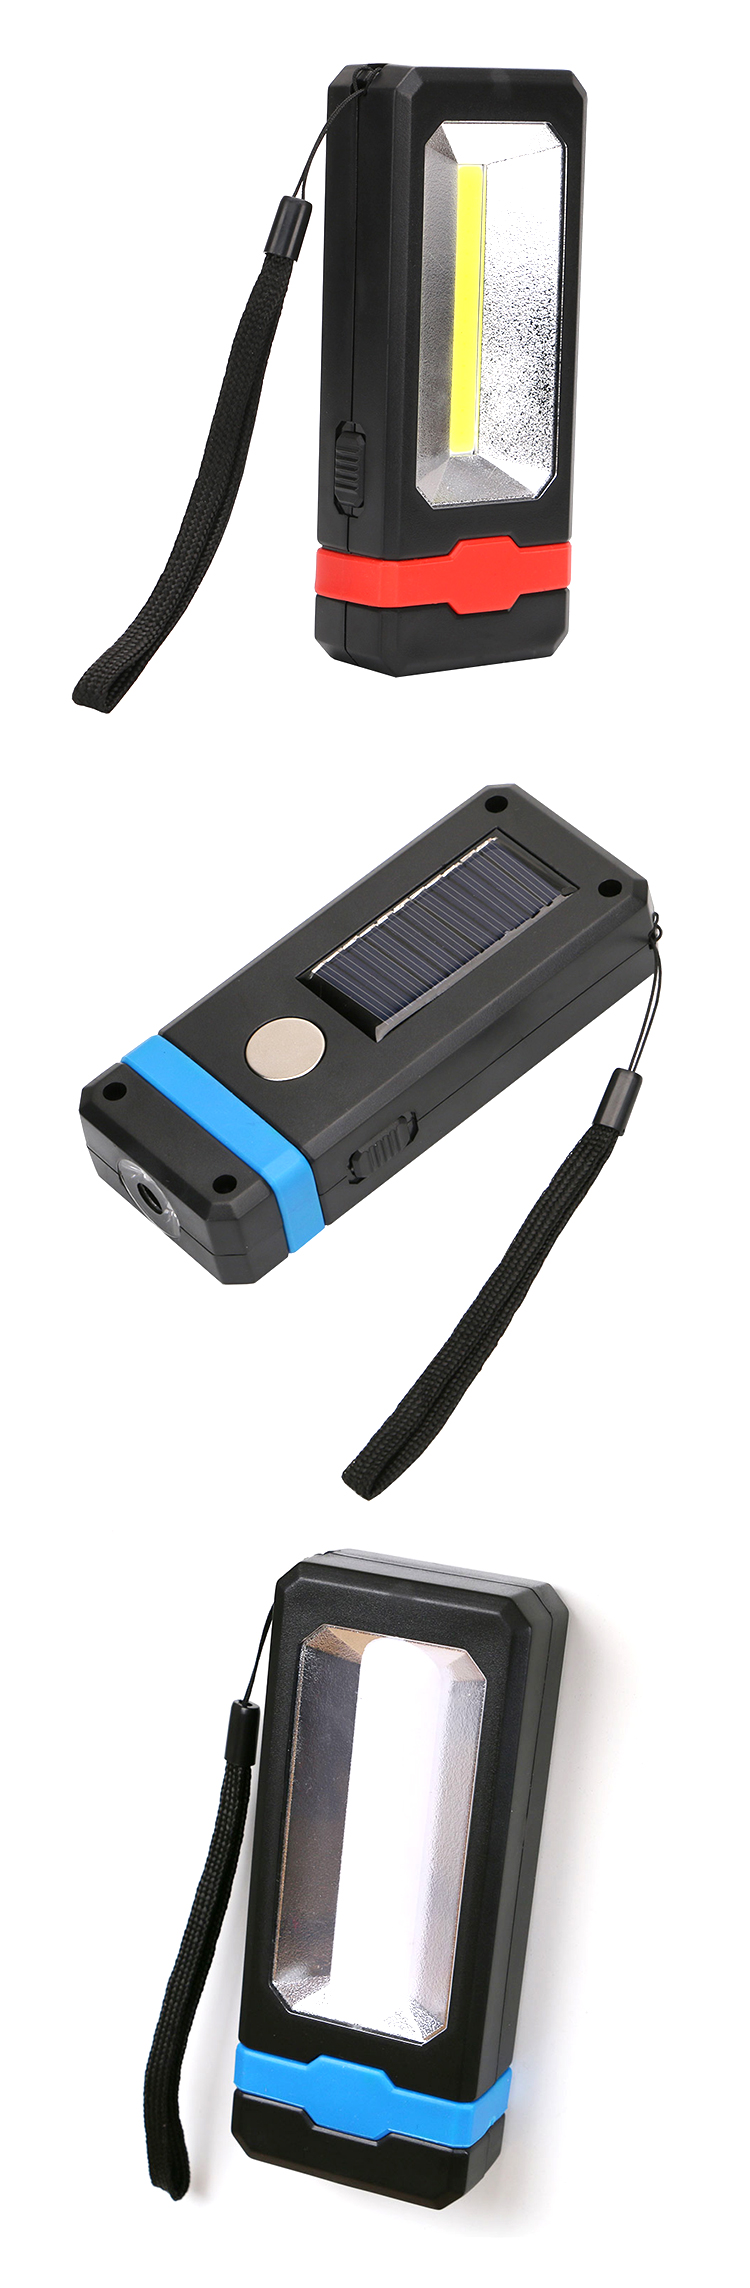 Ultra Bright Portable Working Flashlight magnetic USB Rechargeable COB LED Emergency Work Camping Lamp solar light